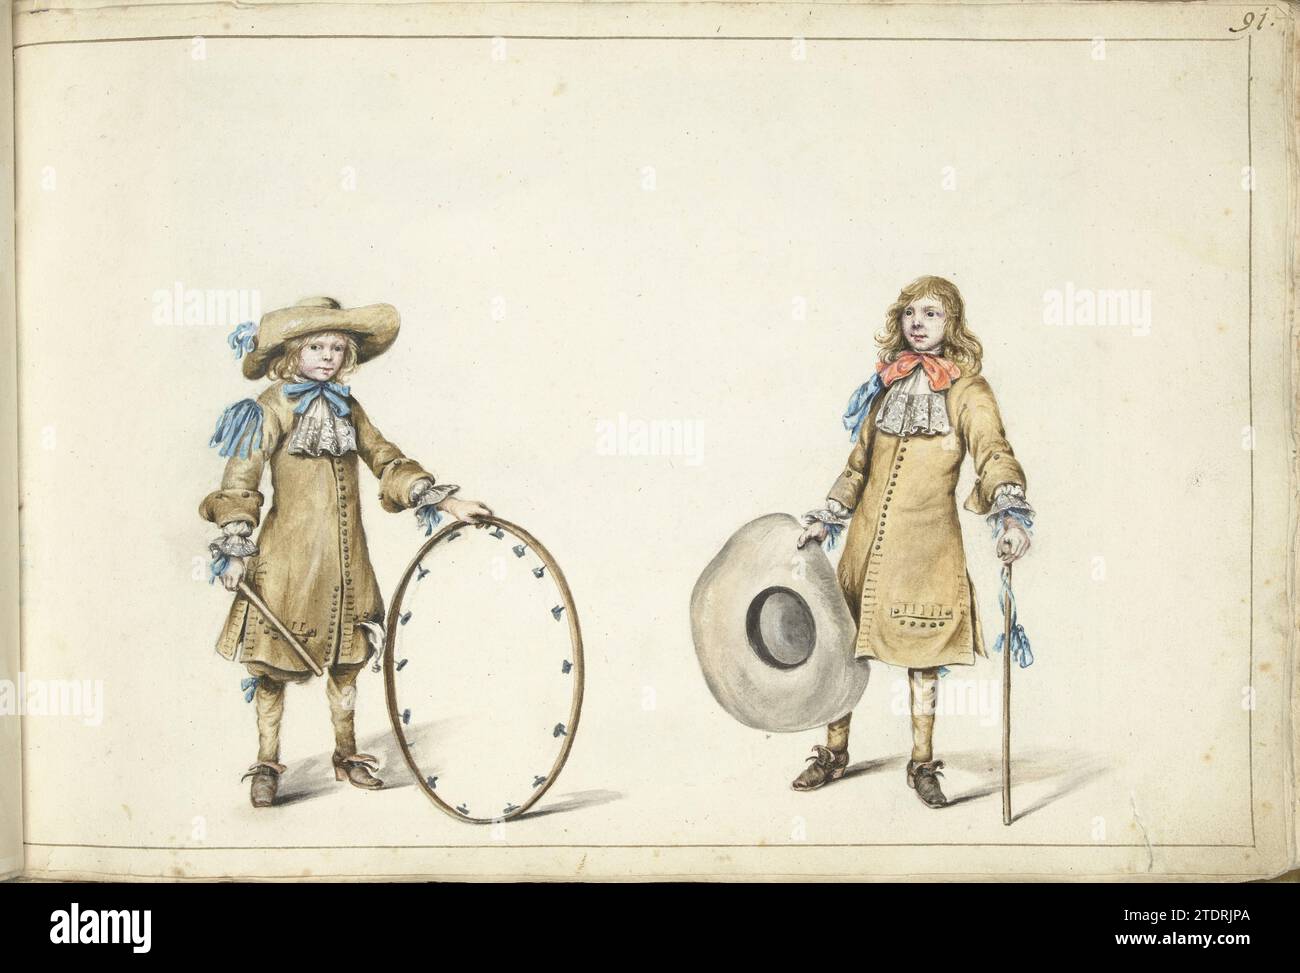 Gerrit and Cornelis Schellinger as a child, c. 1675 - c. 1685 Gerrit and Cornelis Schellinger, nephews of Gesina ter Borch. Cornelis holds a hoop with loose metal particles that made sound when rolling. The oldest boy, Gerrit, wears a hat with a big edge, possibly also part of a game. Zwolle paper. chalk. watercolor (paint) brush Gerrit and Cornelis Schellinger, nephews of Gesina ter Borch. Cornelis holds a hoop with loose metal particles that made sound when rolling. The oldest boy, Gerrit, wears a hat with a big edge, possibly also part of a game. Zwolle paper. chalk. watercolor (paint) brus Stock Photo